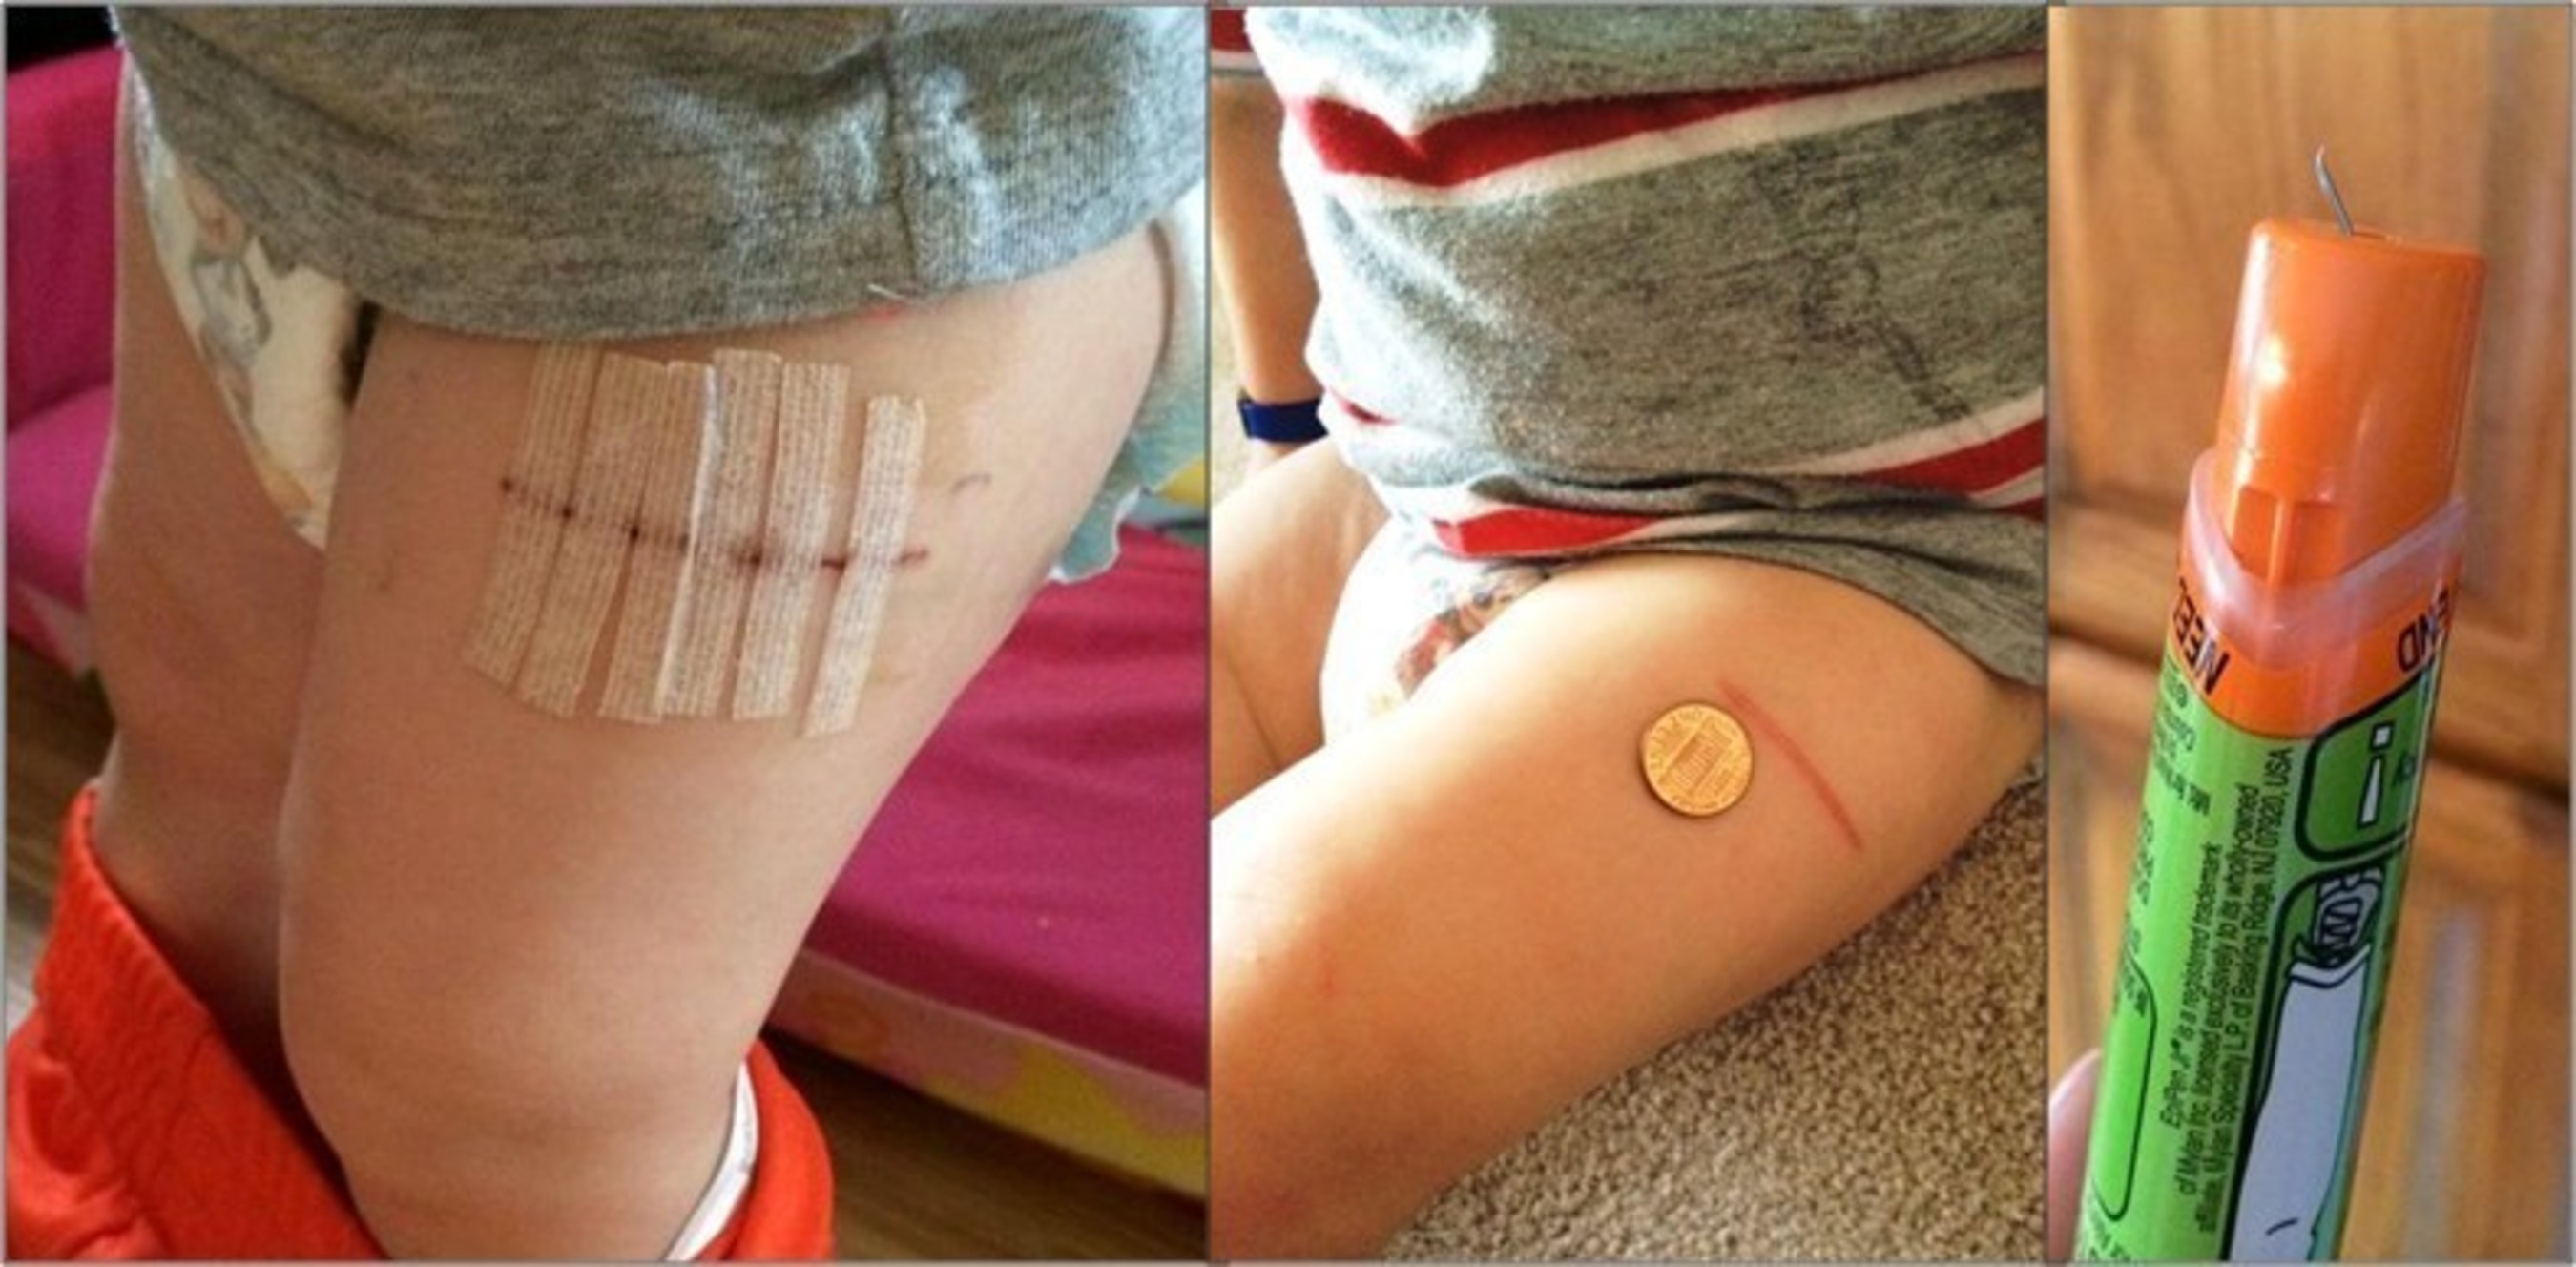 Epinephrine autoinjector injuries in children can be severe. Annals of Emergency Medicine